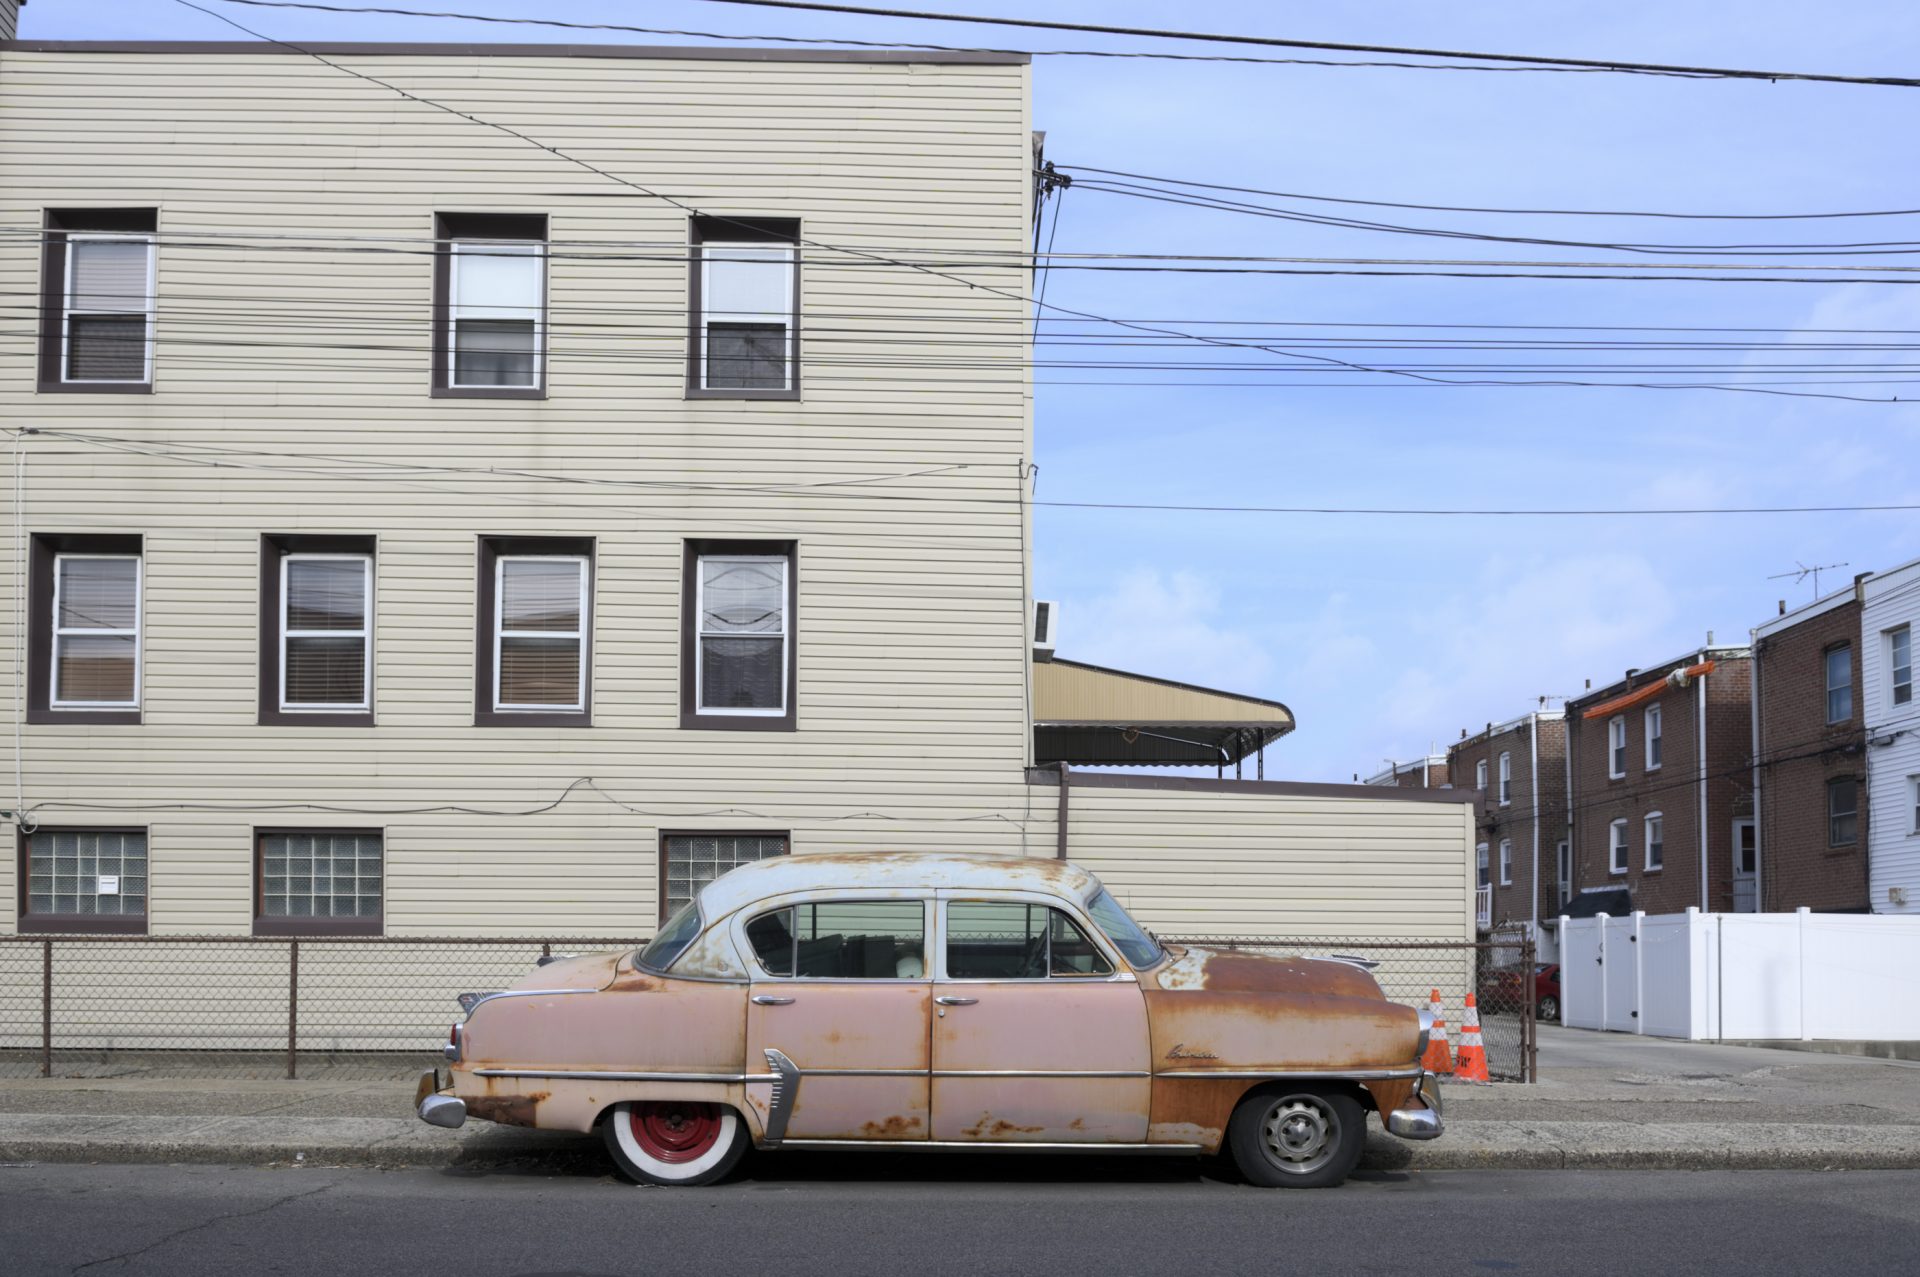 A vintage and rust stained Plymouth is parked near the intersection of Bath St. and Gillingham St. in the Bridesburg neighborhood of Philadelphia, PA, on February 28, 2020.